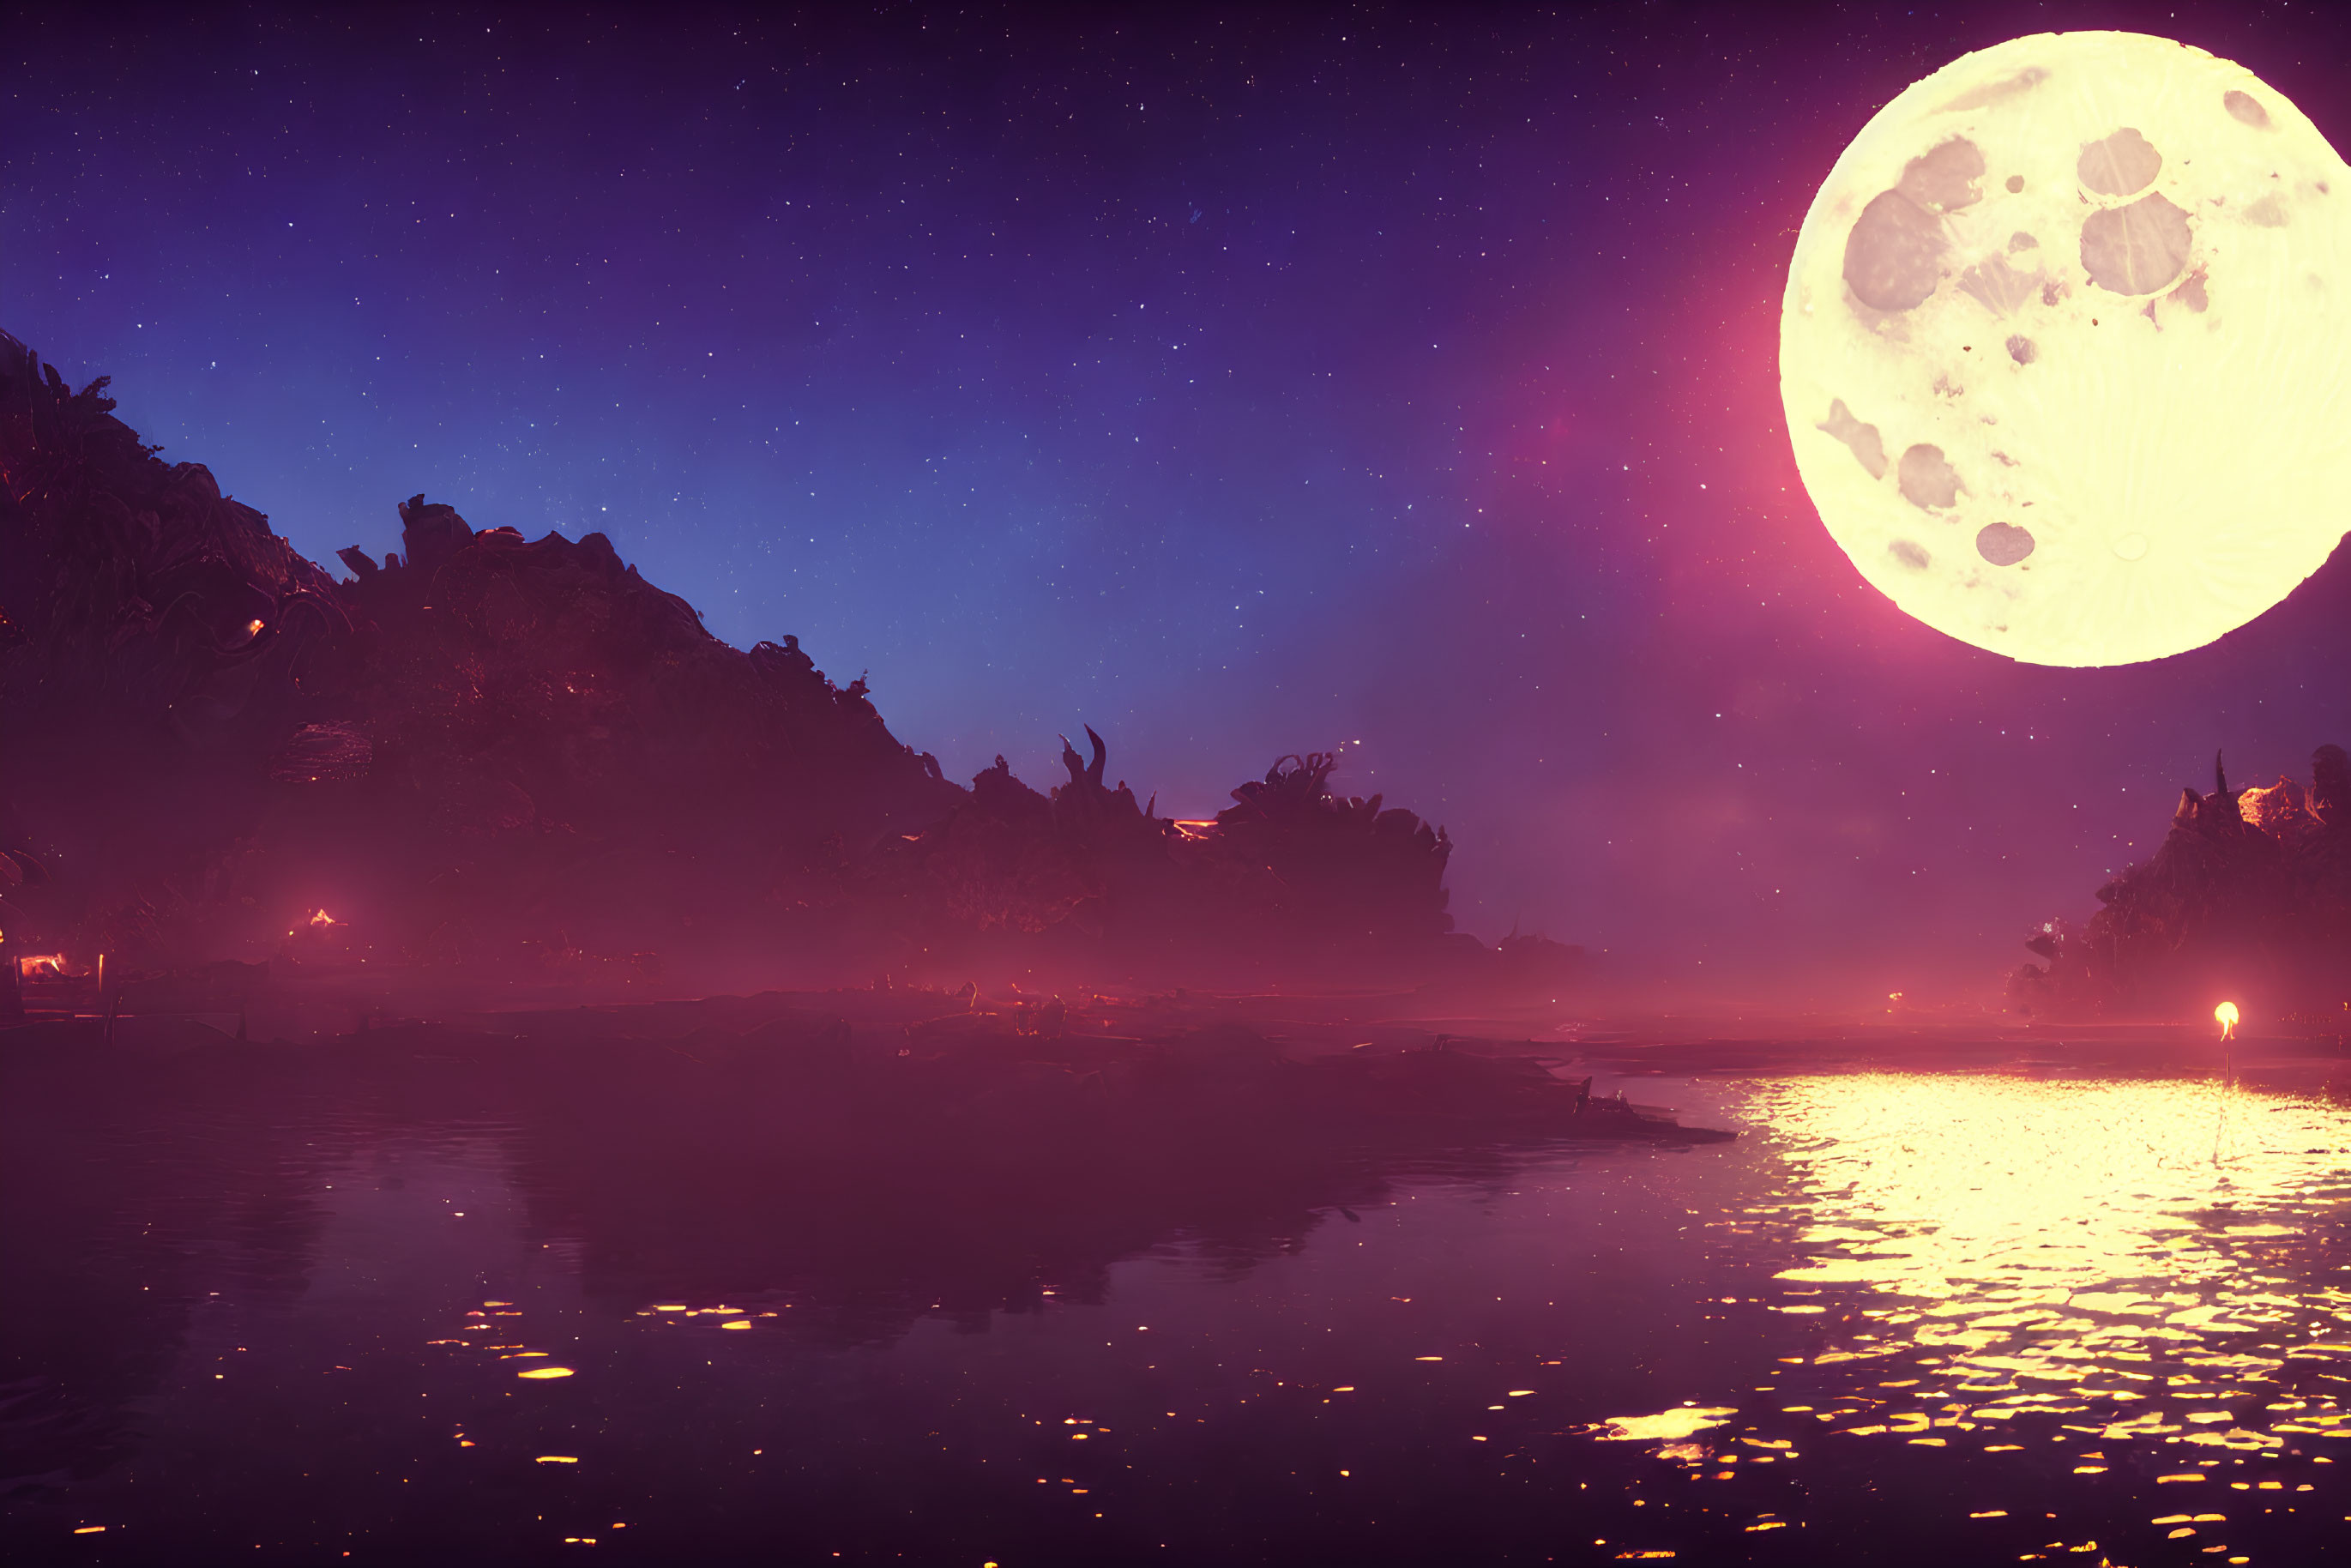 Tranquil night landscape with glowing moon, calm lake, silhouetted mountains, starry